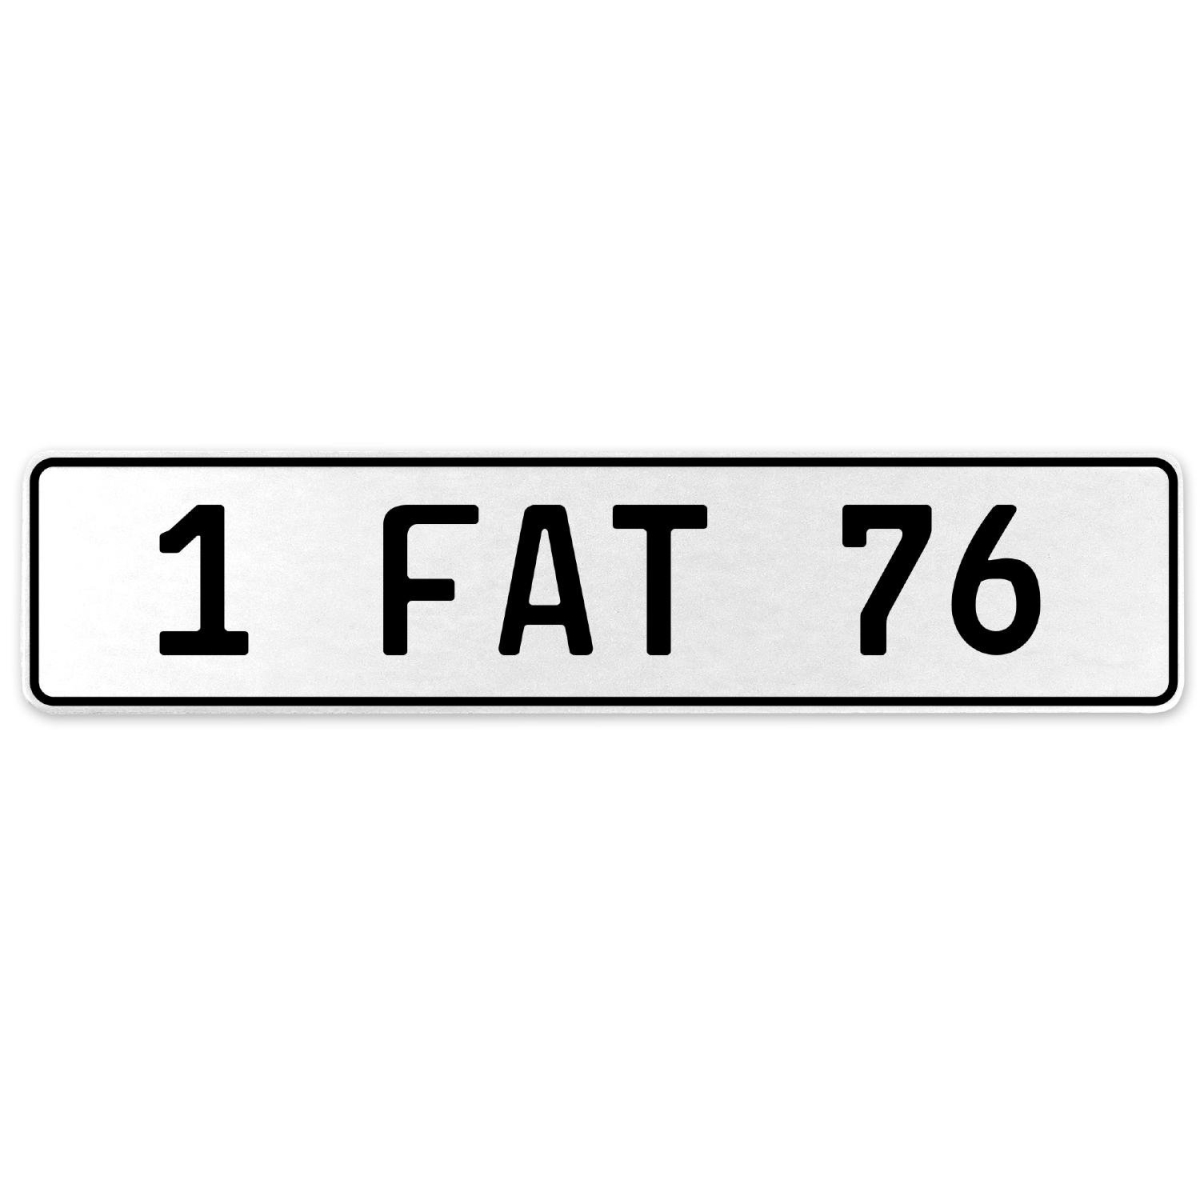 554673 1 Fat 76 - White Aluminum Street Sign Mancave Euro Plate Name Door Sign Wall